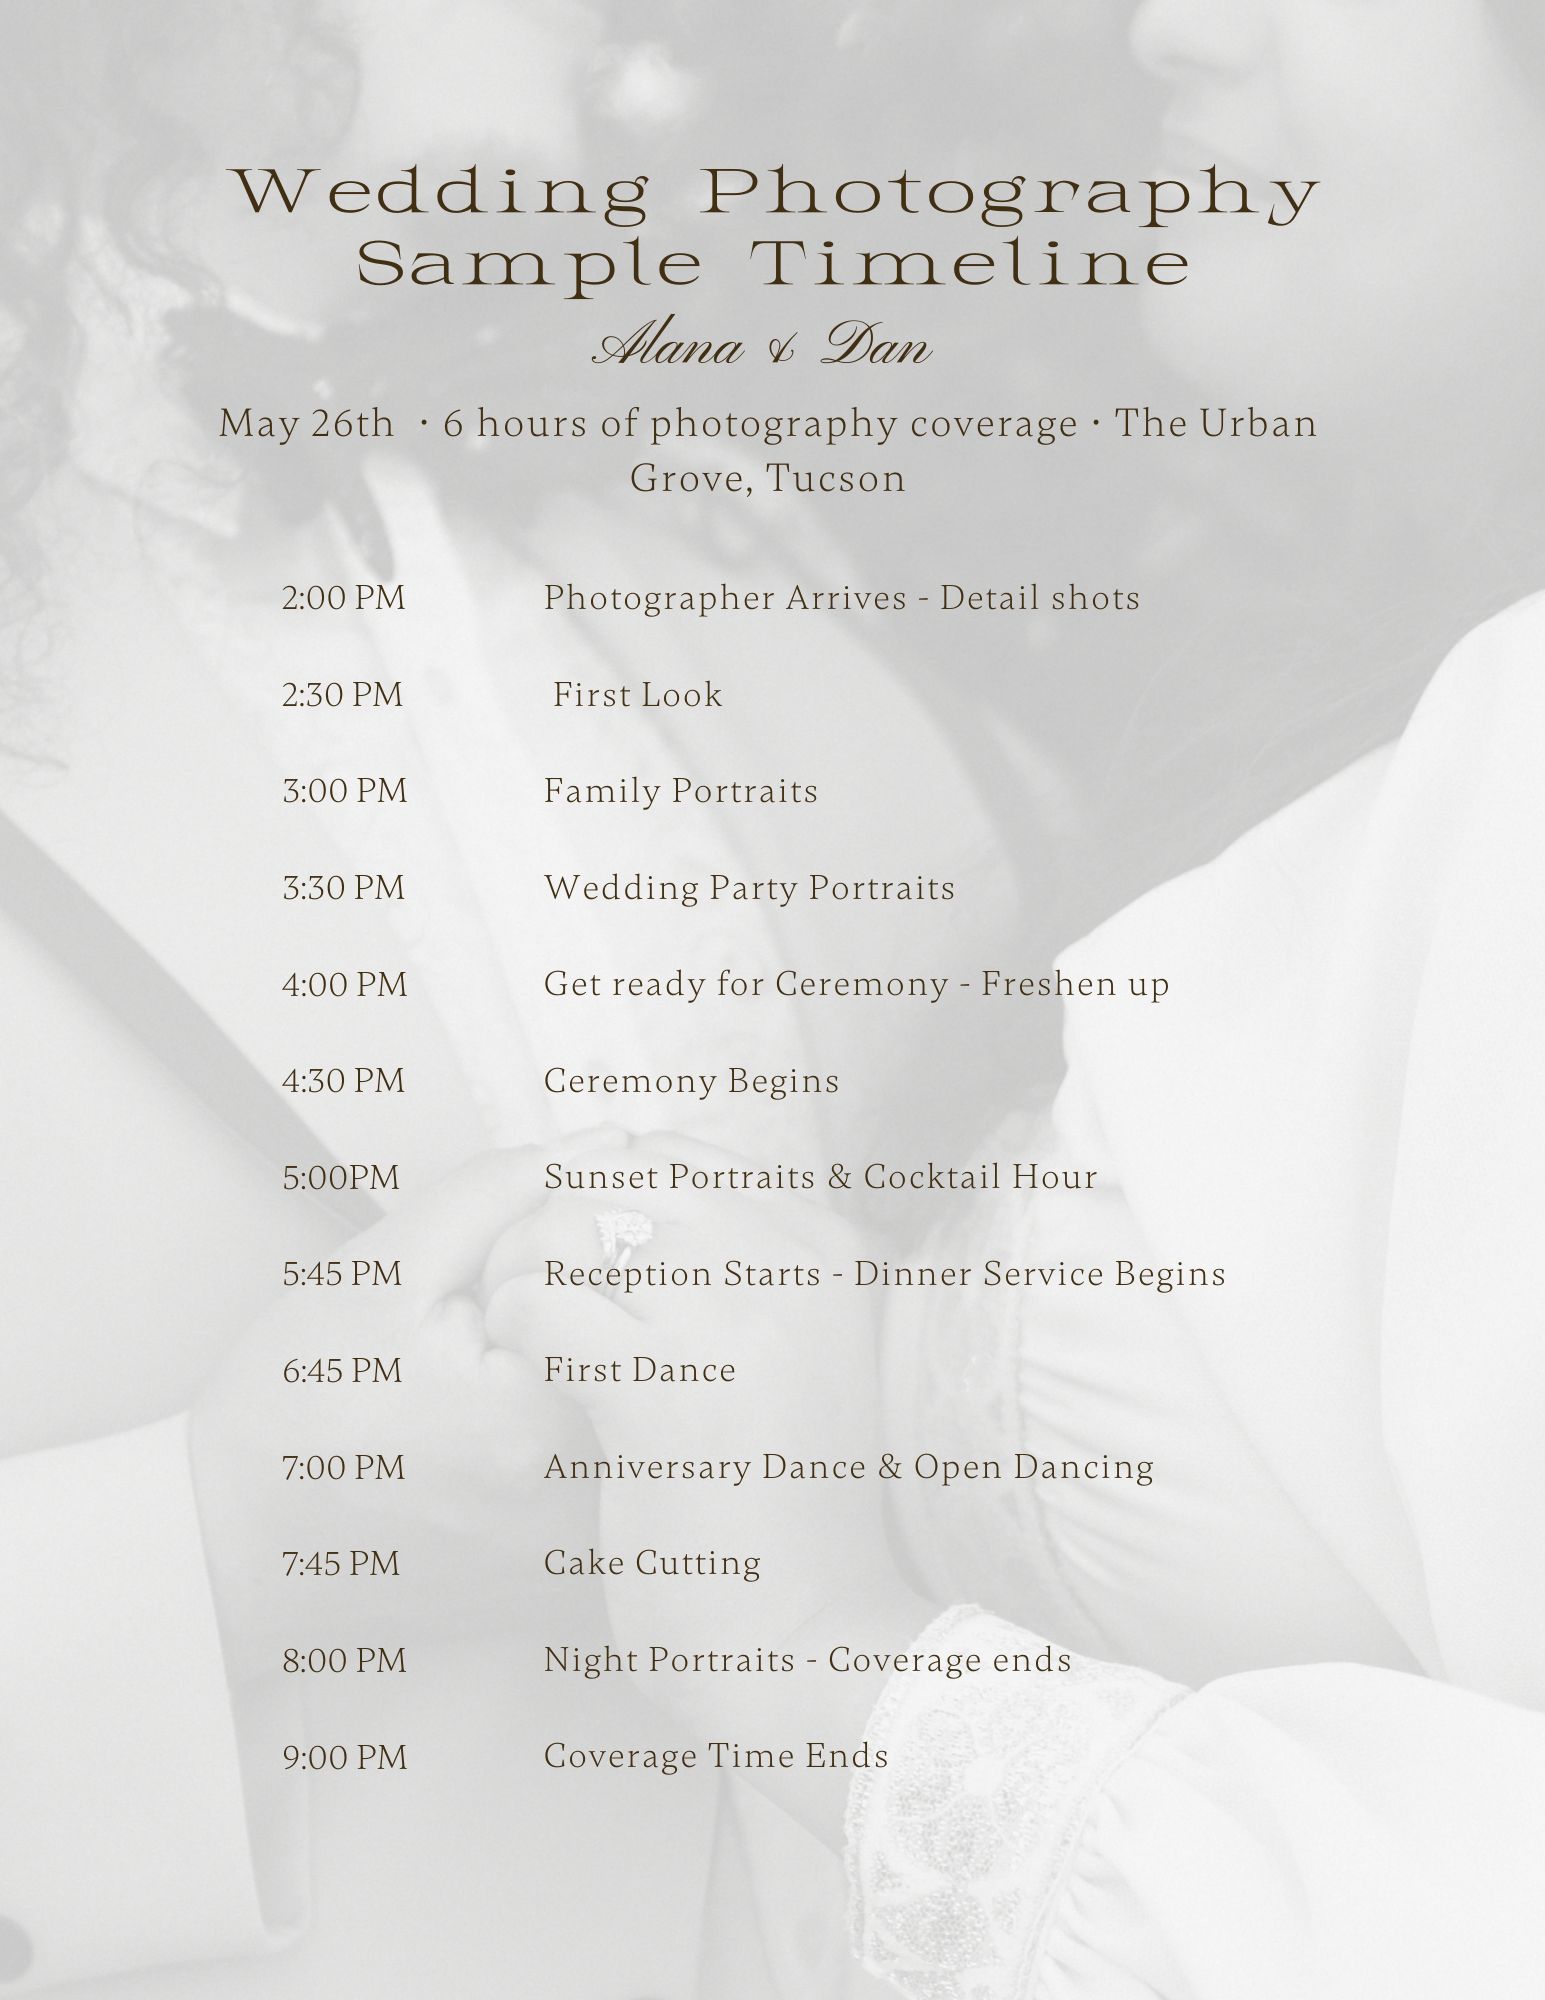 Sample Timeline Graphic for A&D's wedding 